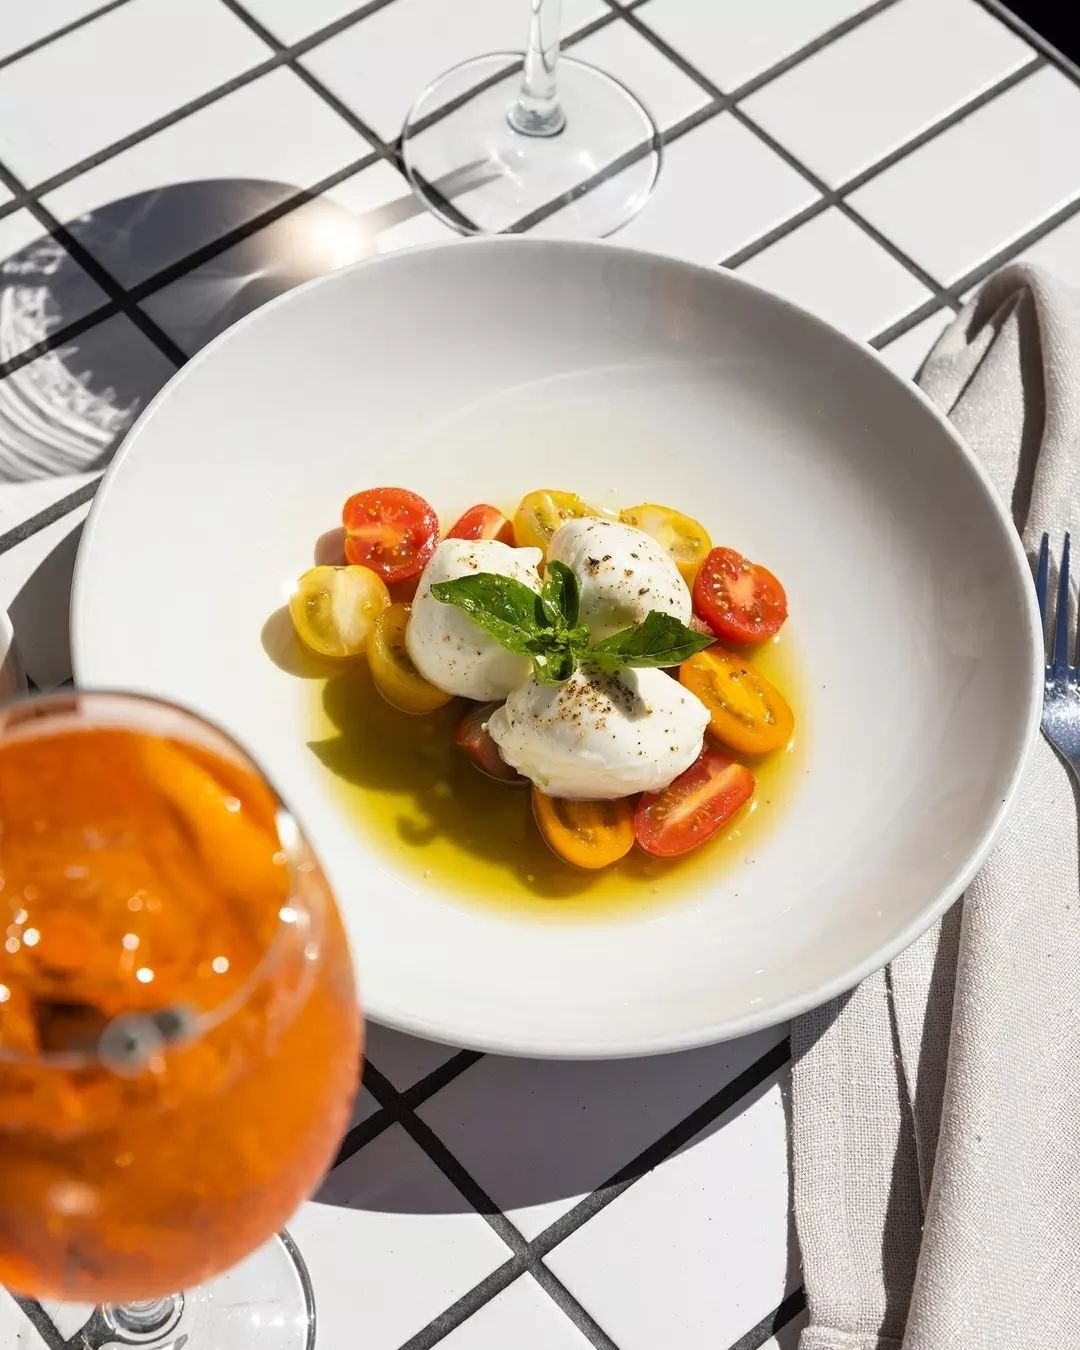 All you need is a little sunshine and Caprese! 

Buffalo bocconcini mozzarella, heirloom cherry tomatoes, basil, olive oil